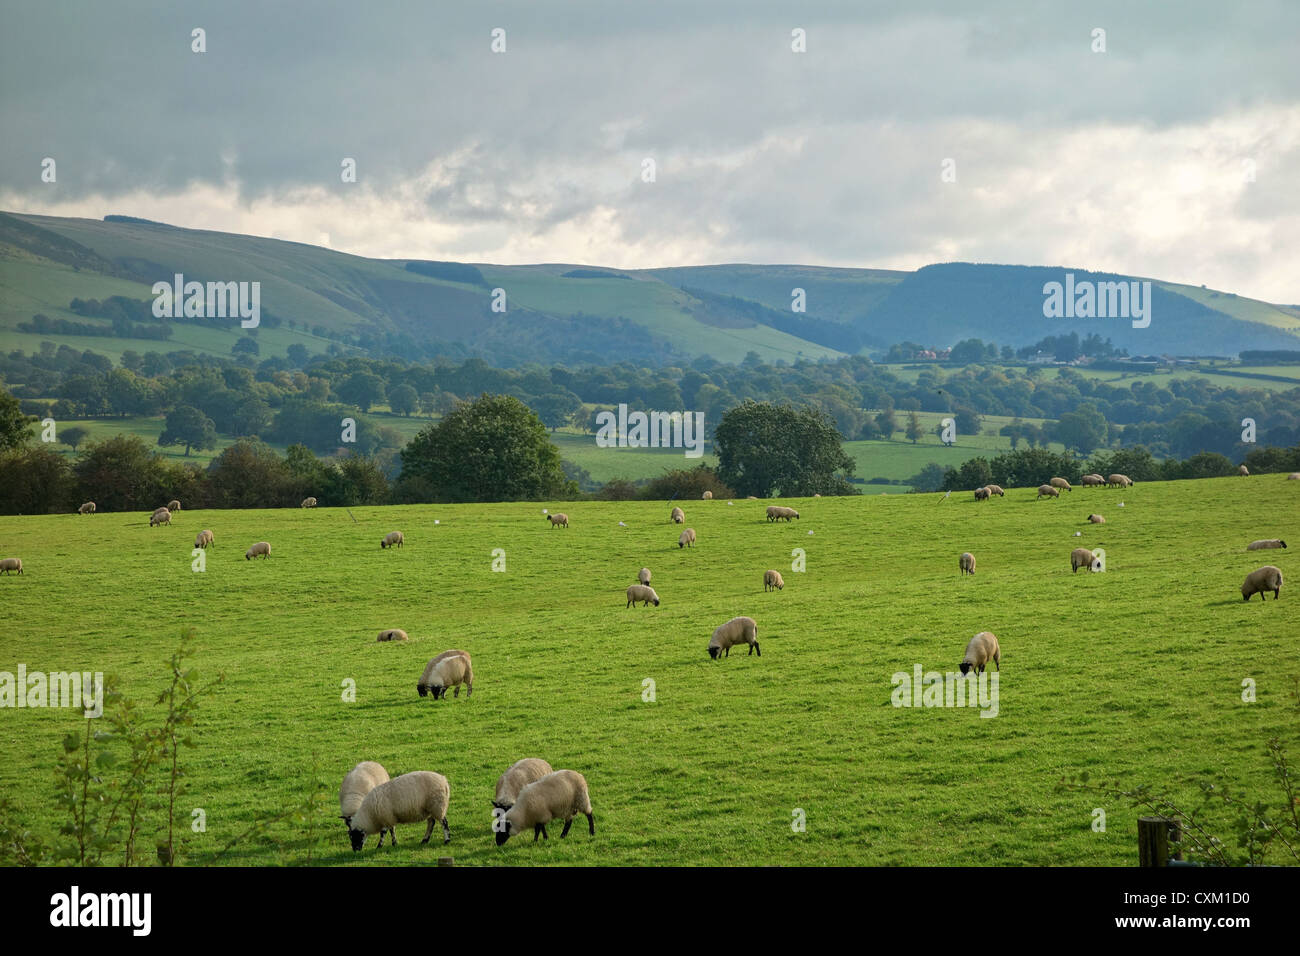 Wales countryside fields and hills, sheep grazing. Stock Photo